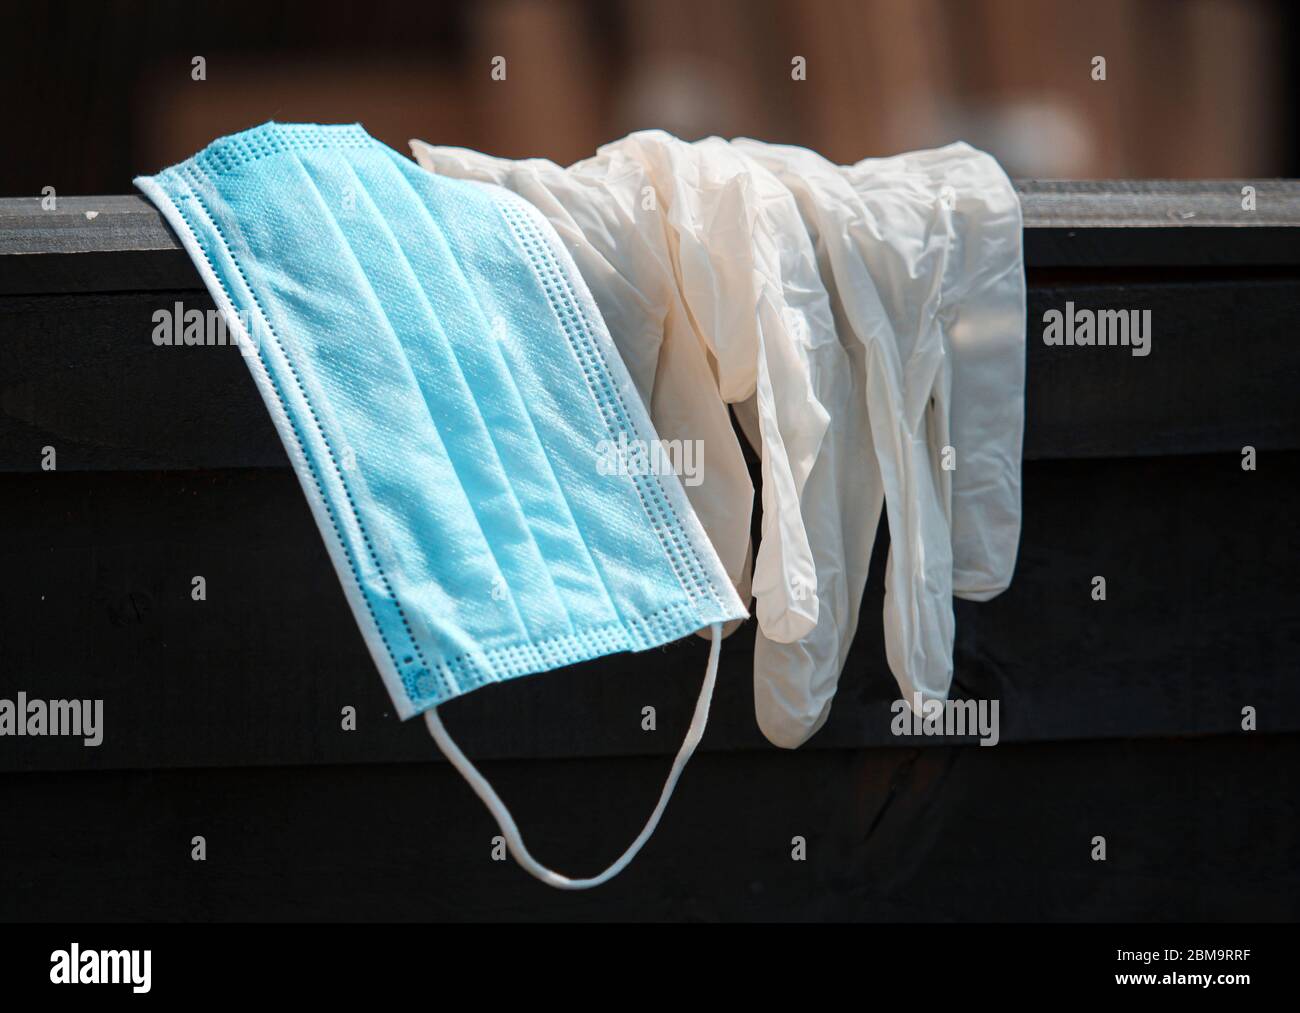 Used and discarded medical personal protective equipment also known as PPE Stock Photo